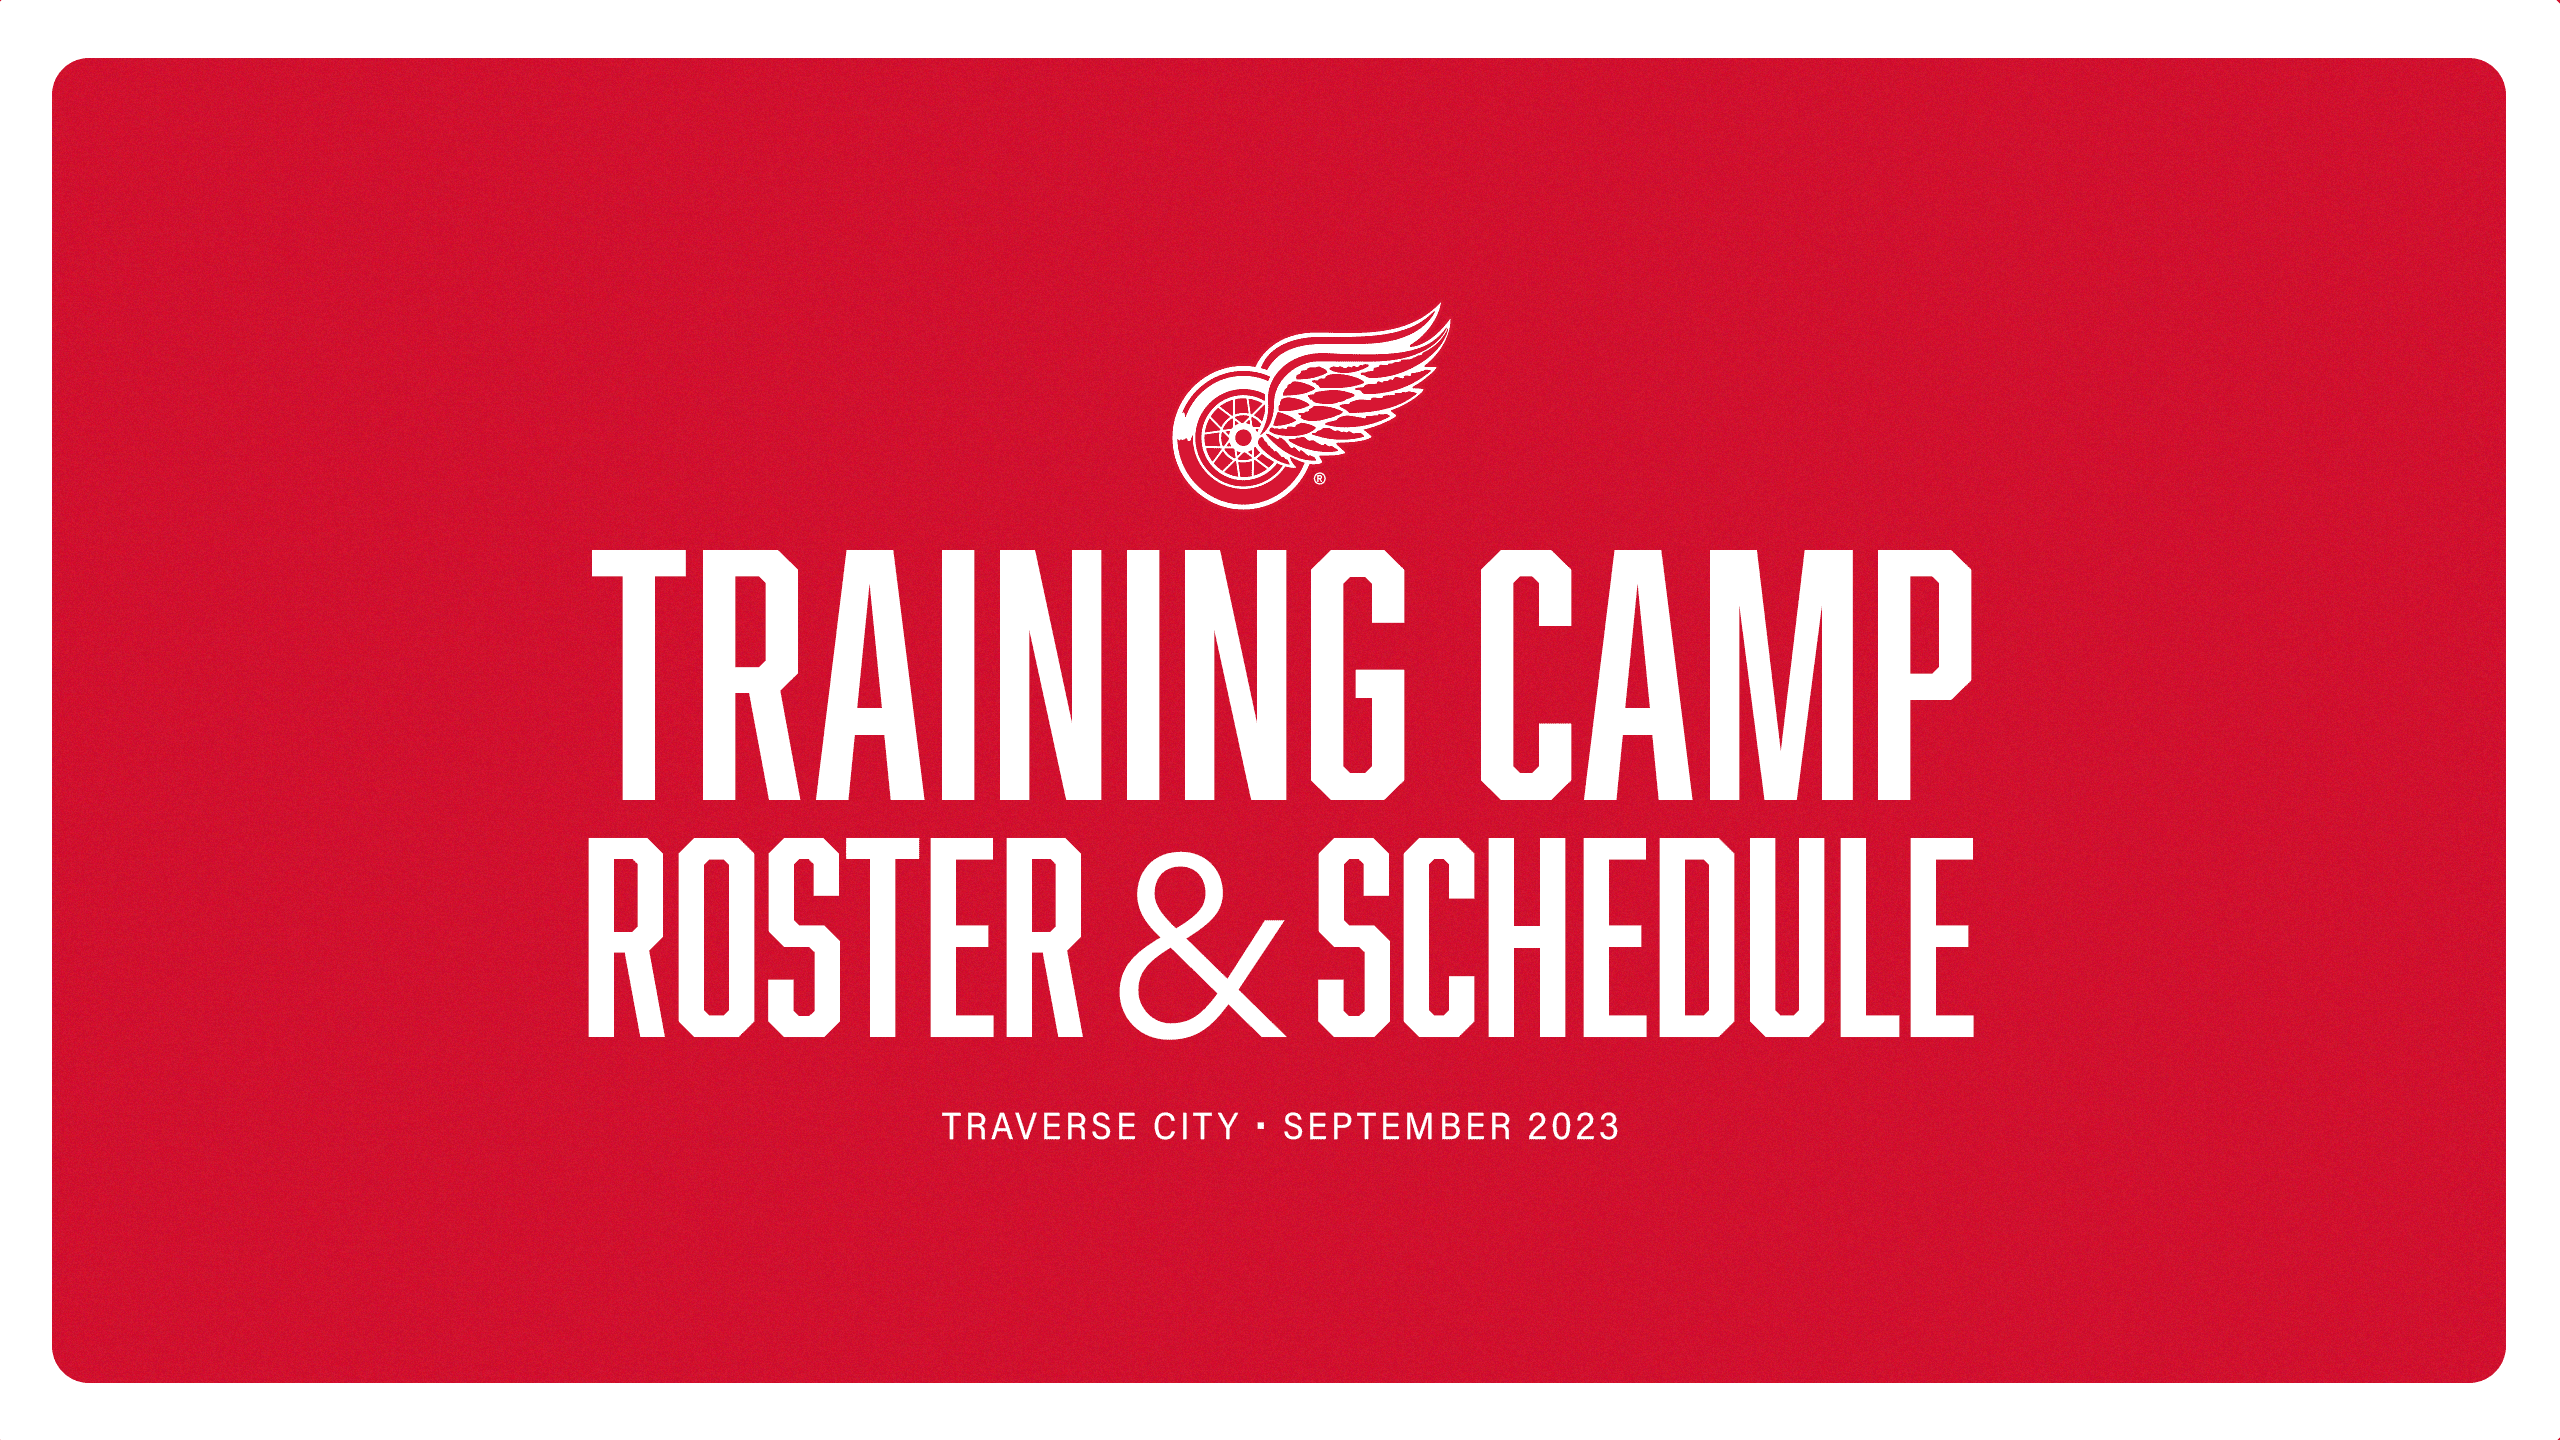 K-WINGS ANNOUNCE 2022-23 TRAINING CAMP ROSTER